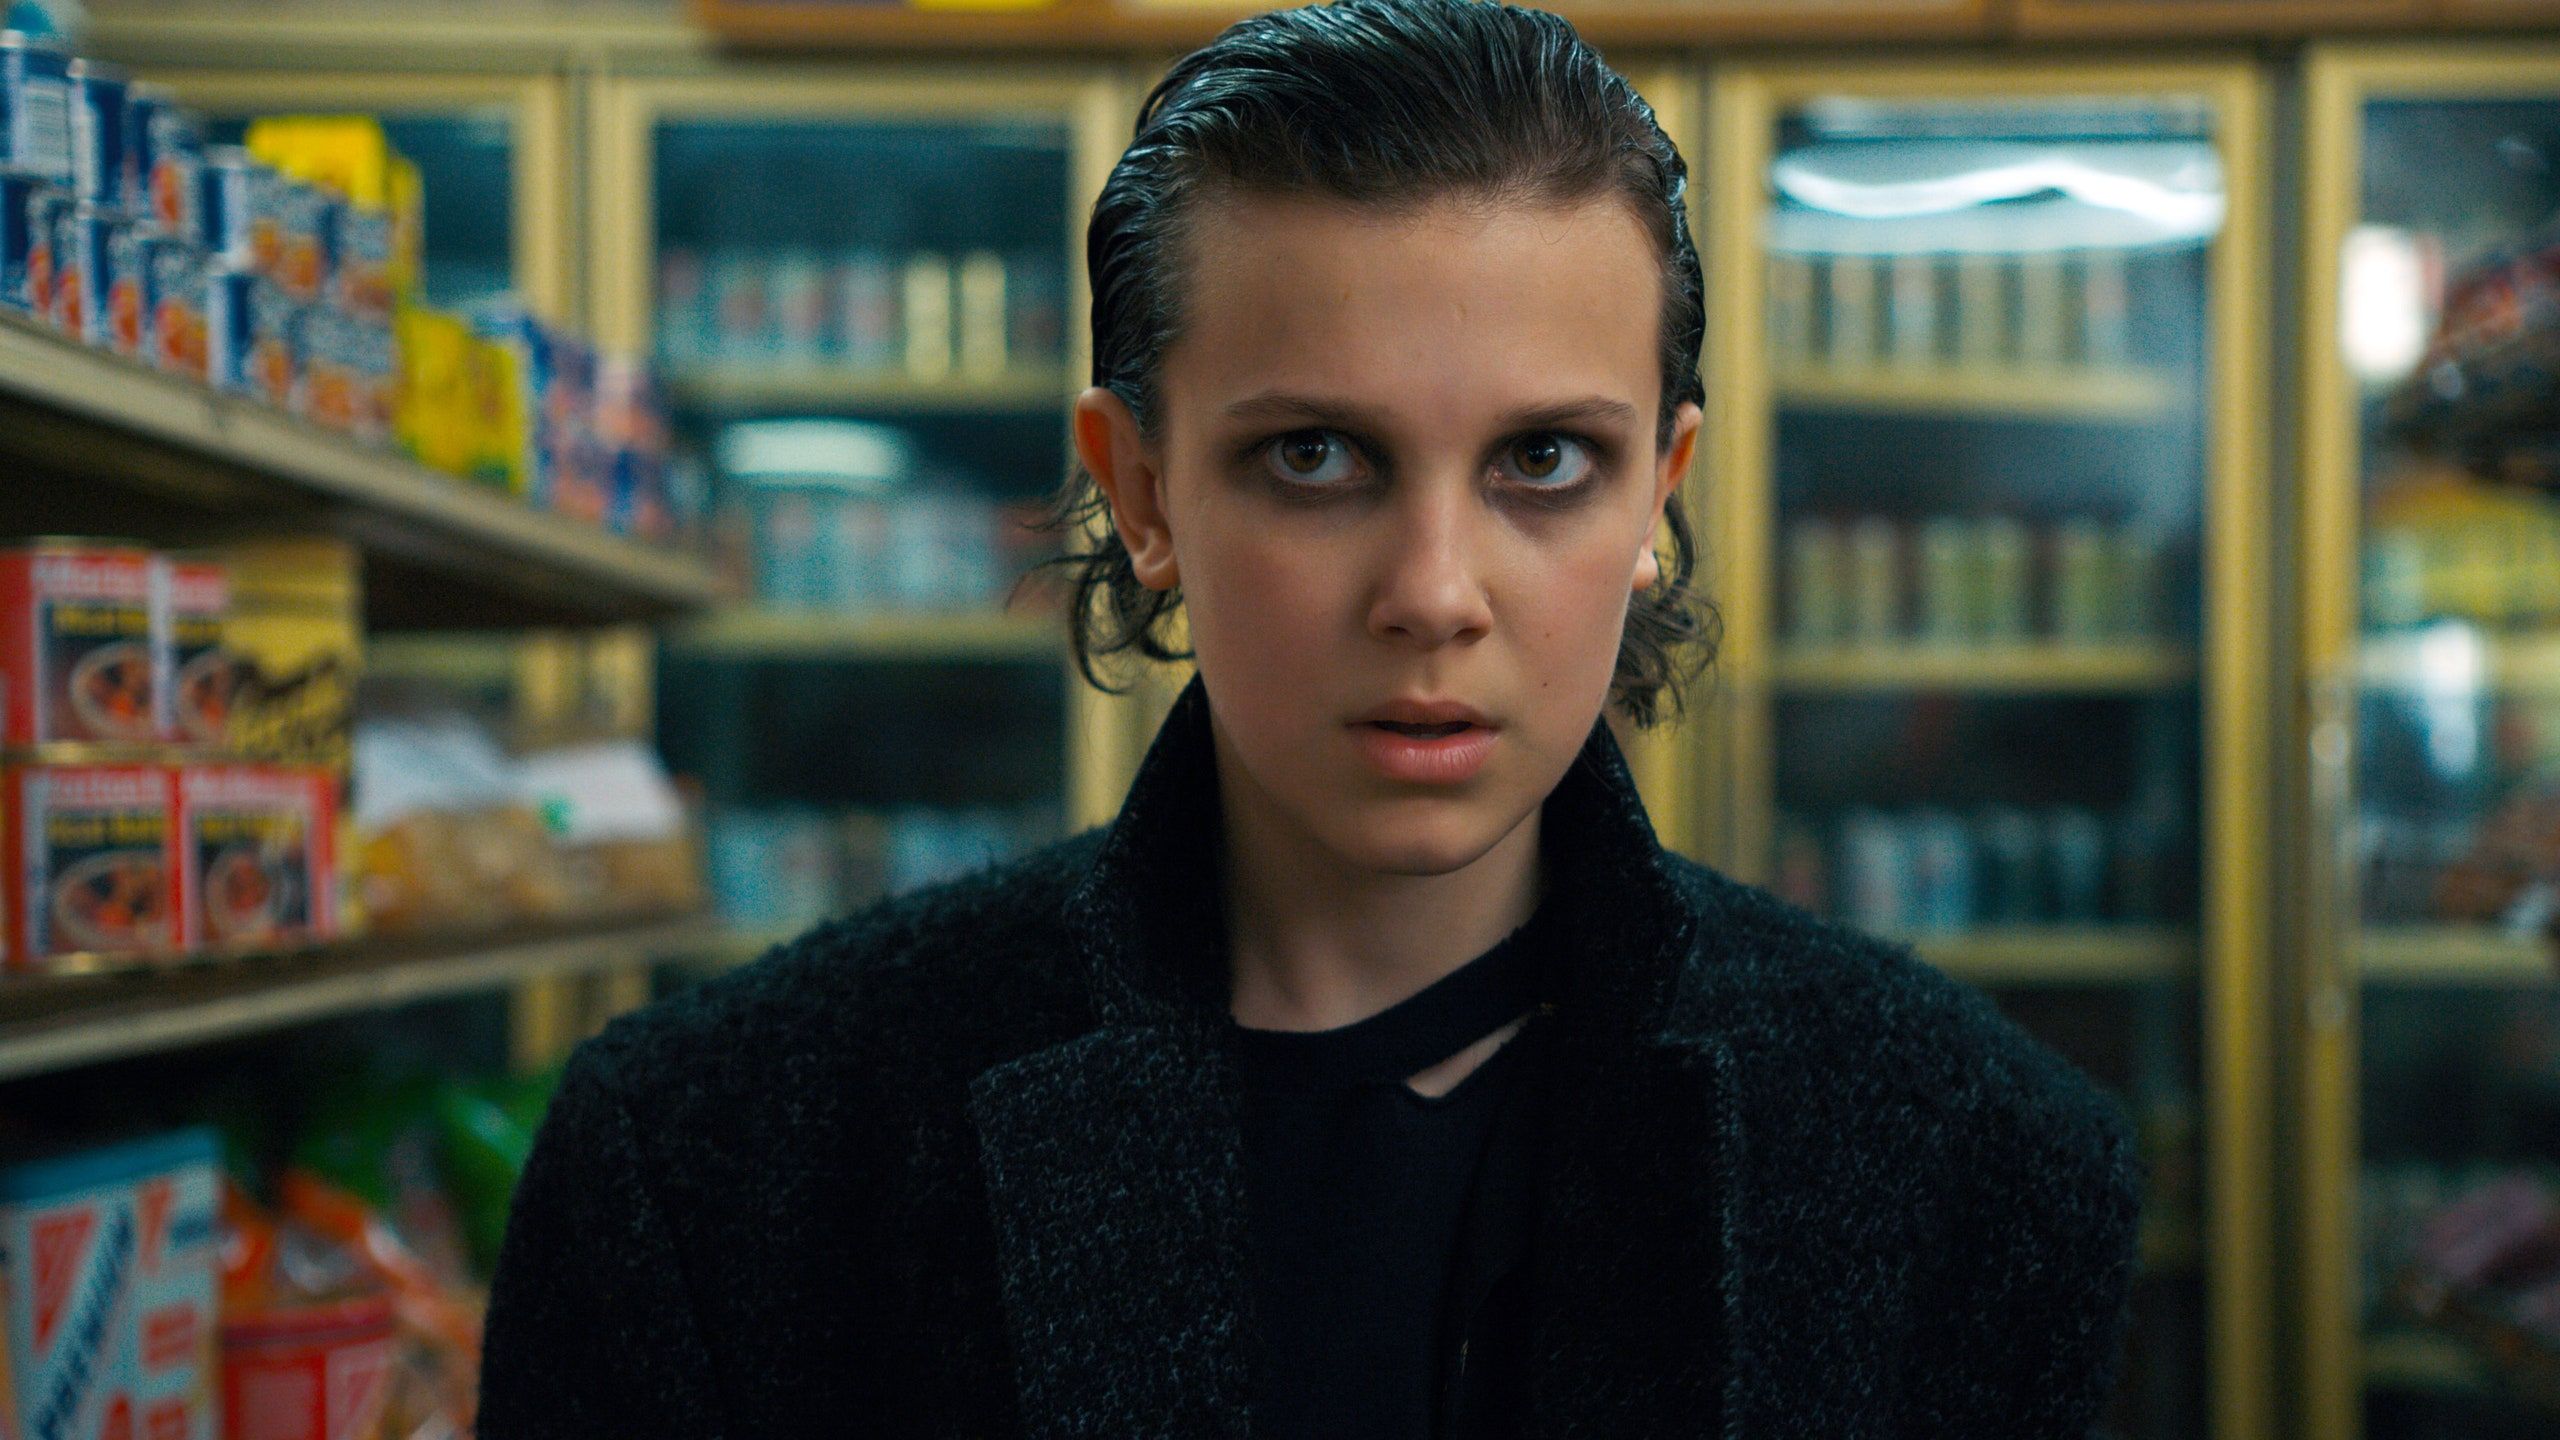 Stranger Things Fans Have Formed Intense Theories Based on Set Photo of Millie Bobby Brown